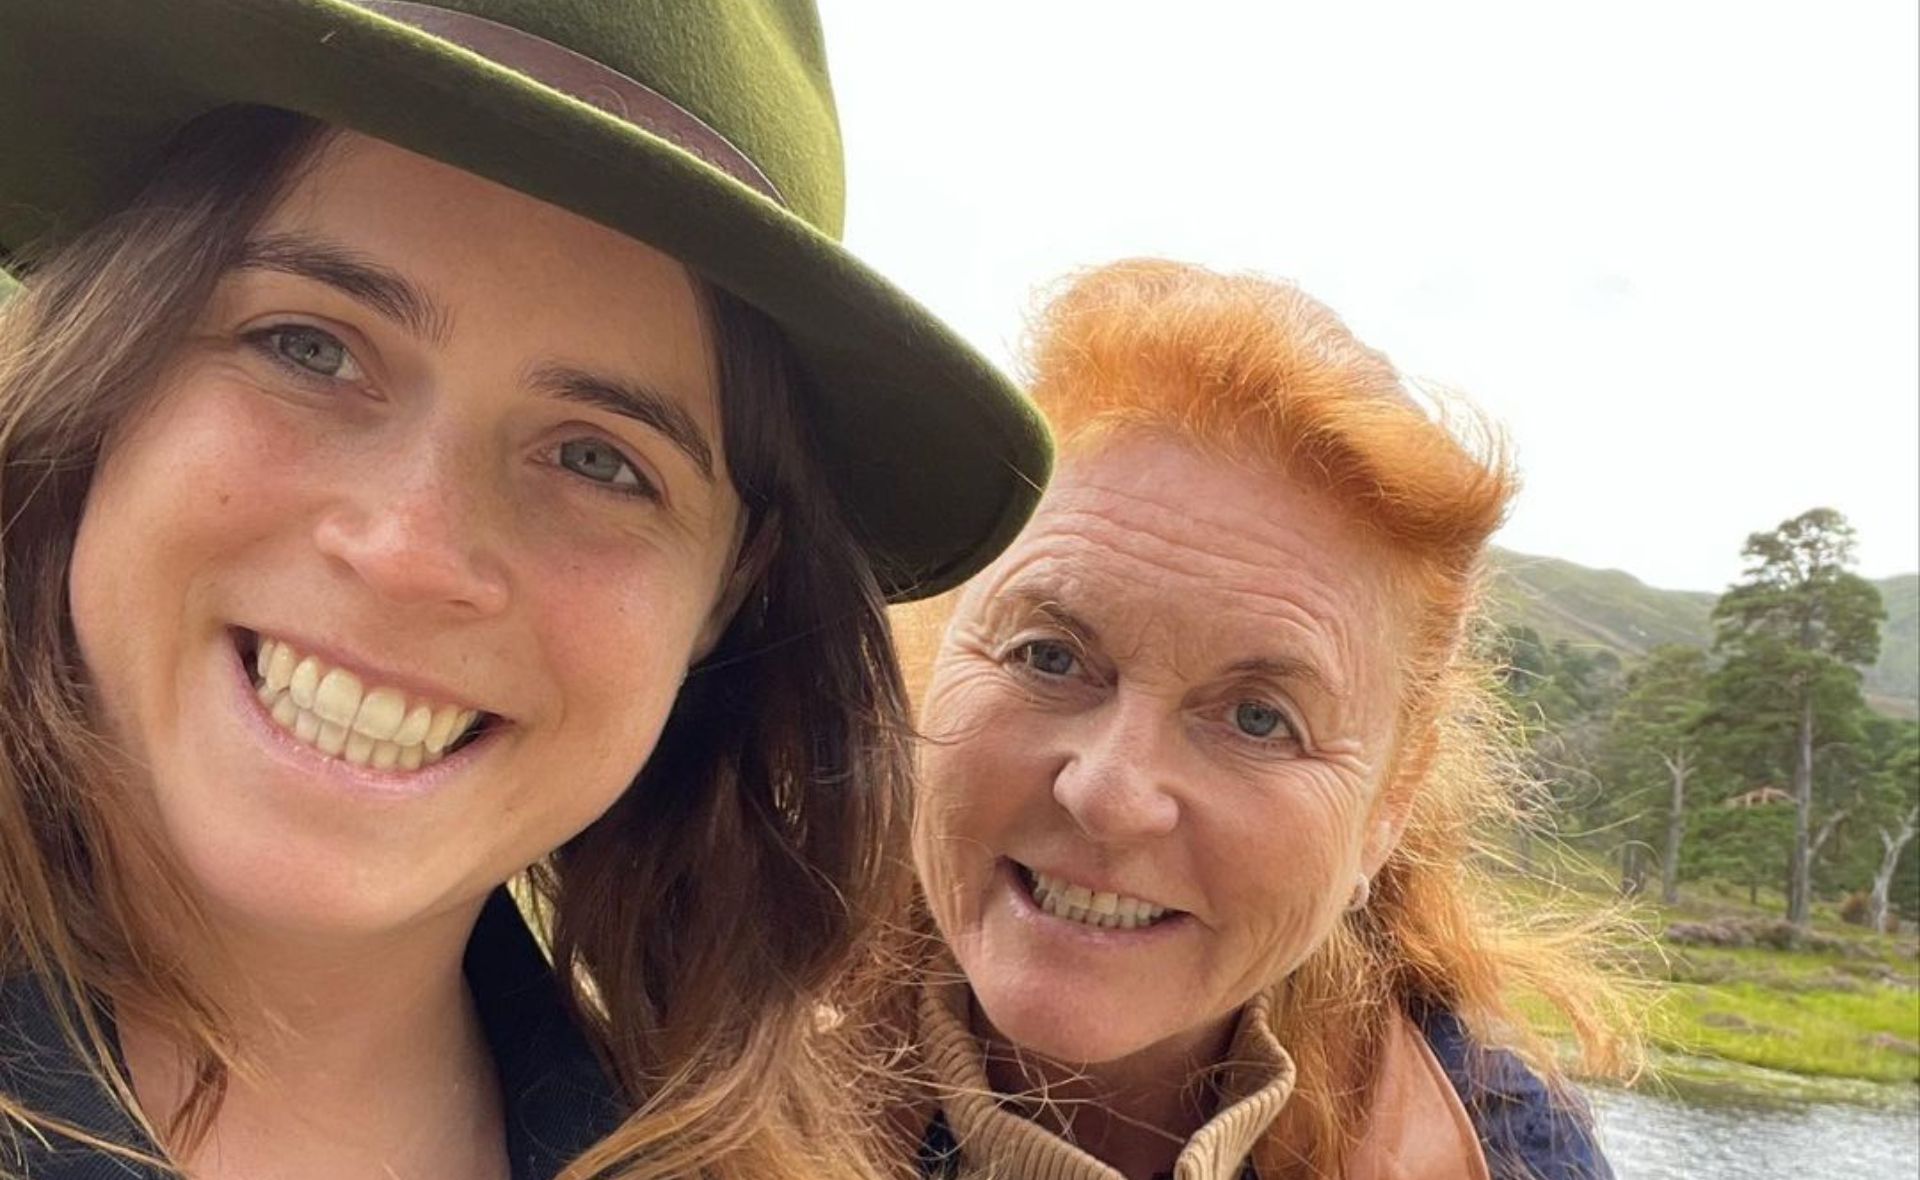 Princess Eugenie praised for her “normal and refreshing” approach to royal life as she releases never-before-seen photos